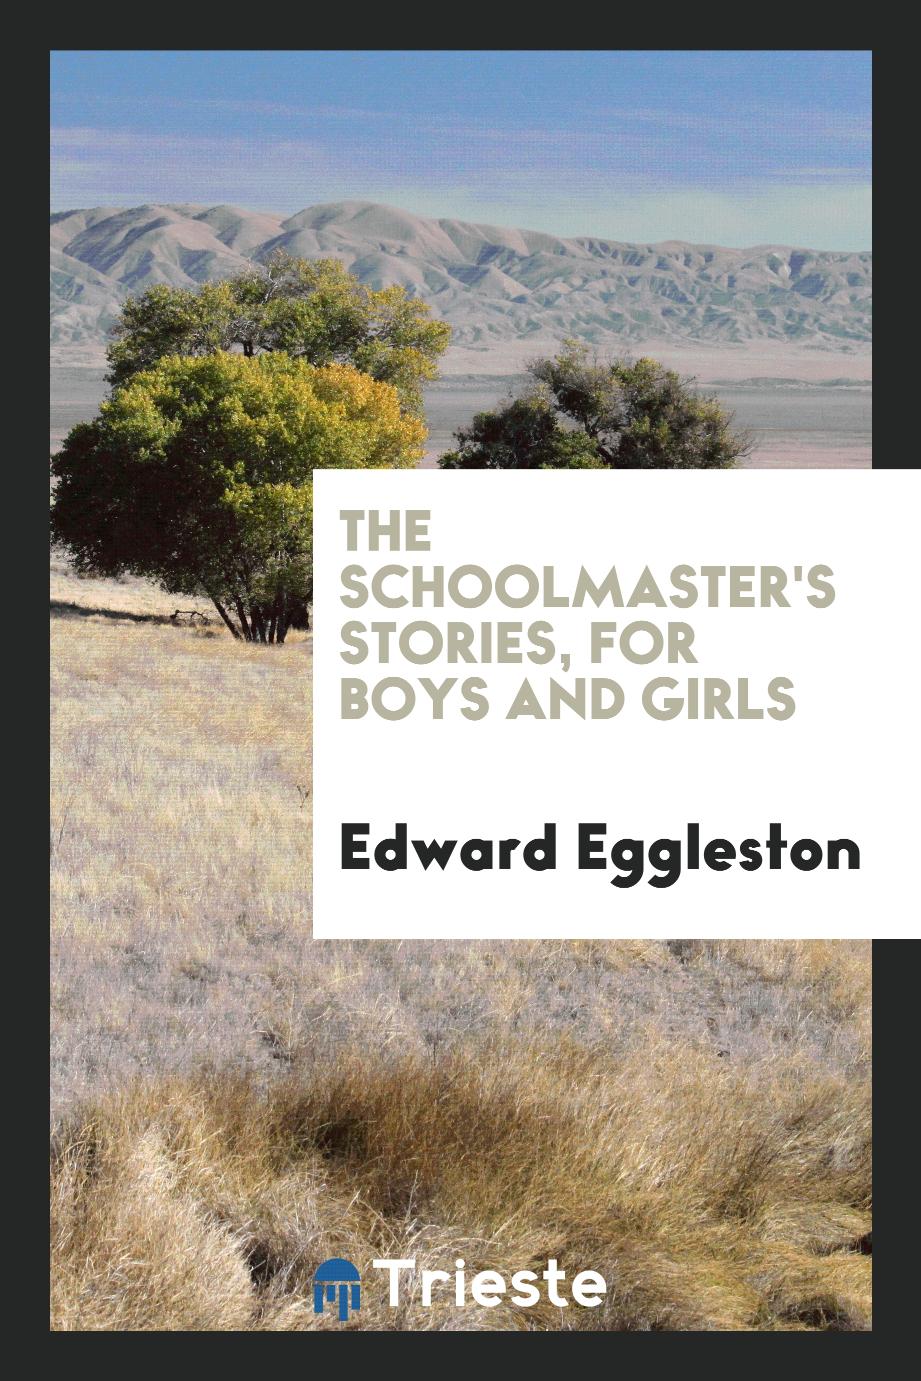 The Schoolmaster's Stories, for Boys and Girls